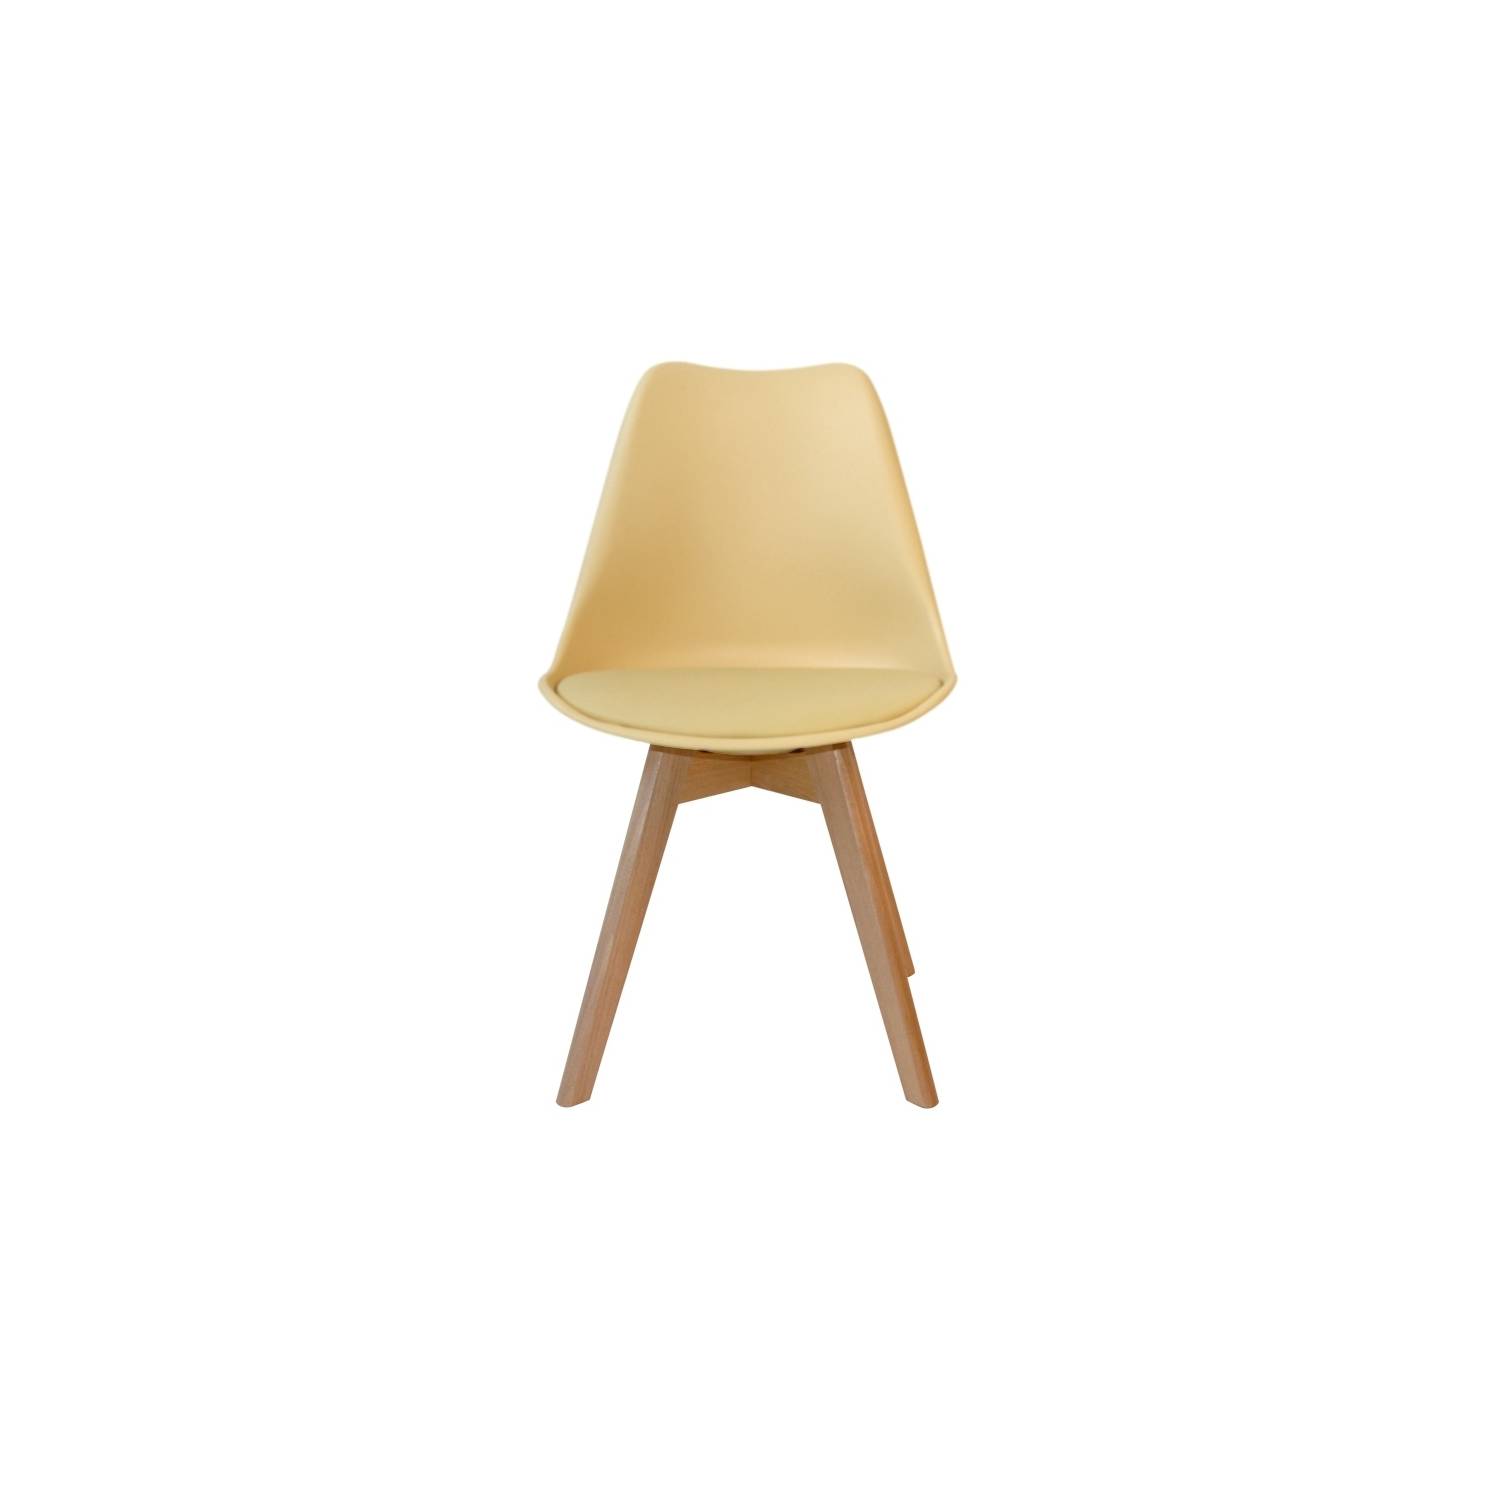 PACK 4 CHAISES NEW TOWER WOOD VAINILLE